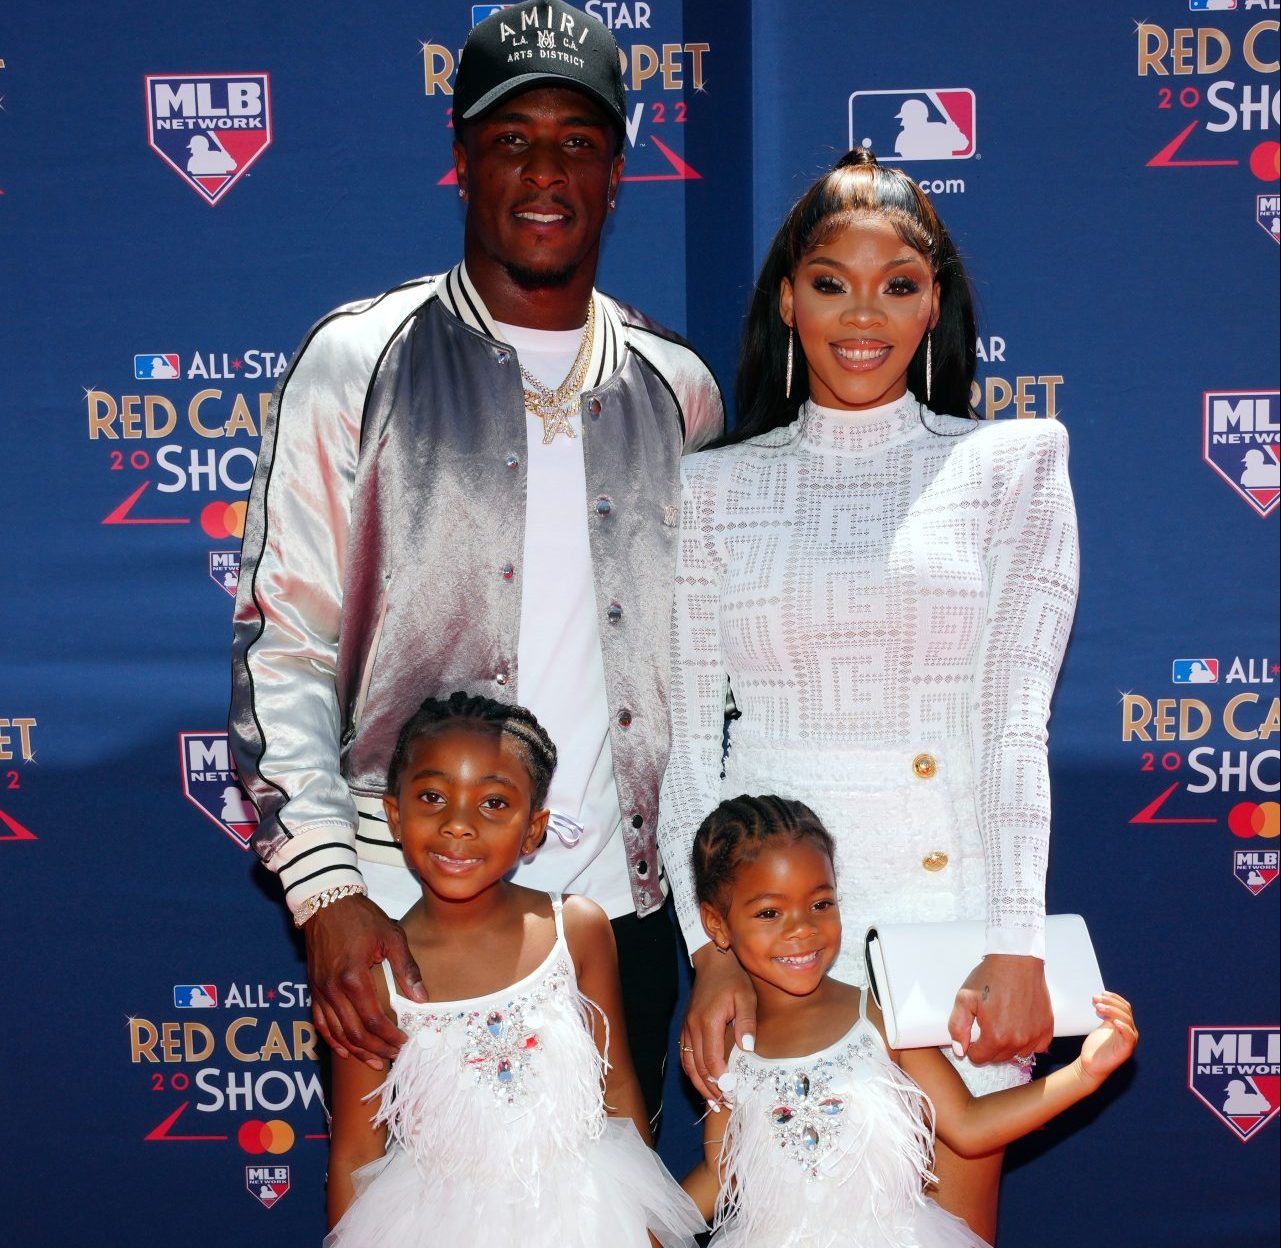 MLB Star Tim Anderson Walks The Red Carpet With His Wife & Children After Another Woman Alleges He Is The Father Of Her Child